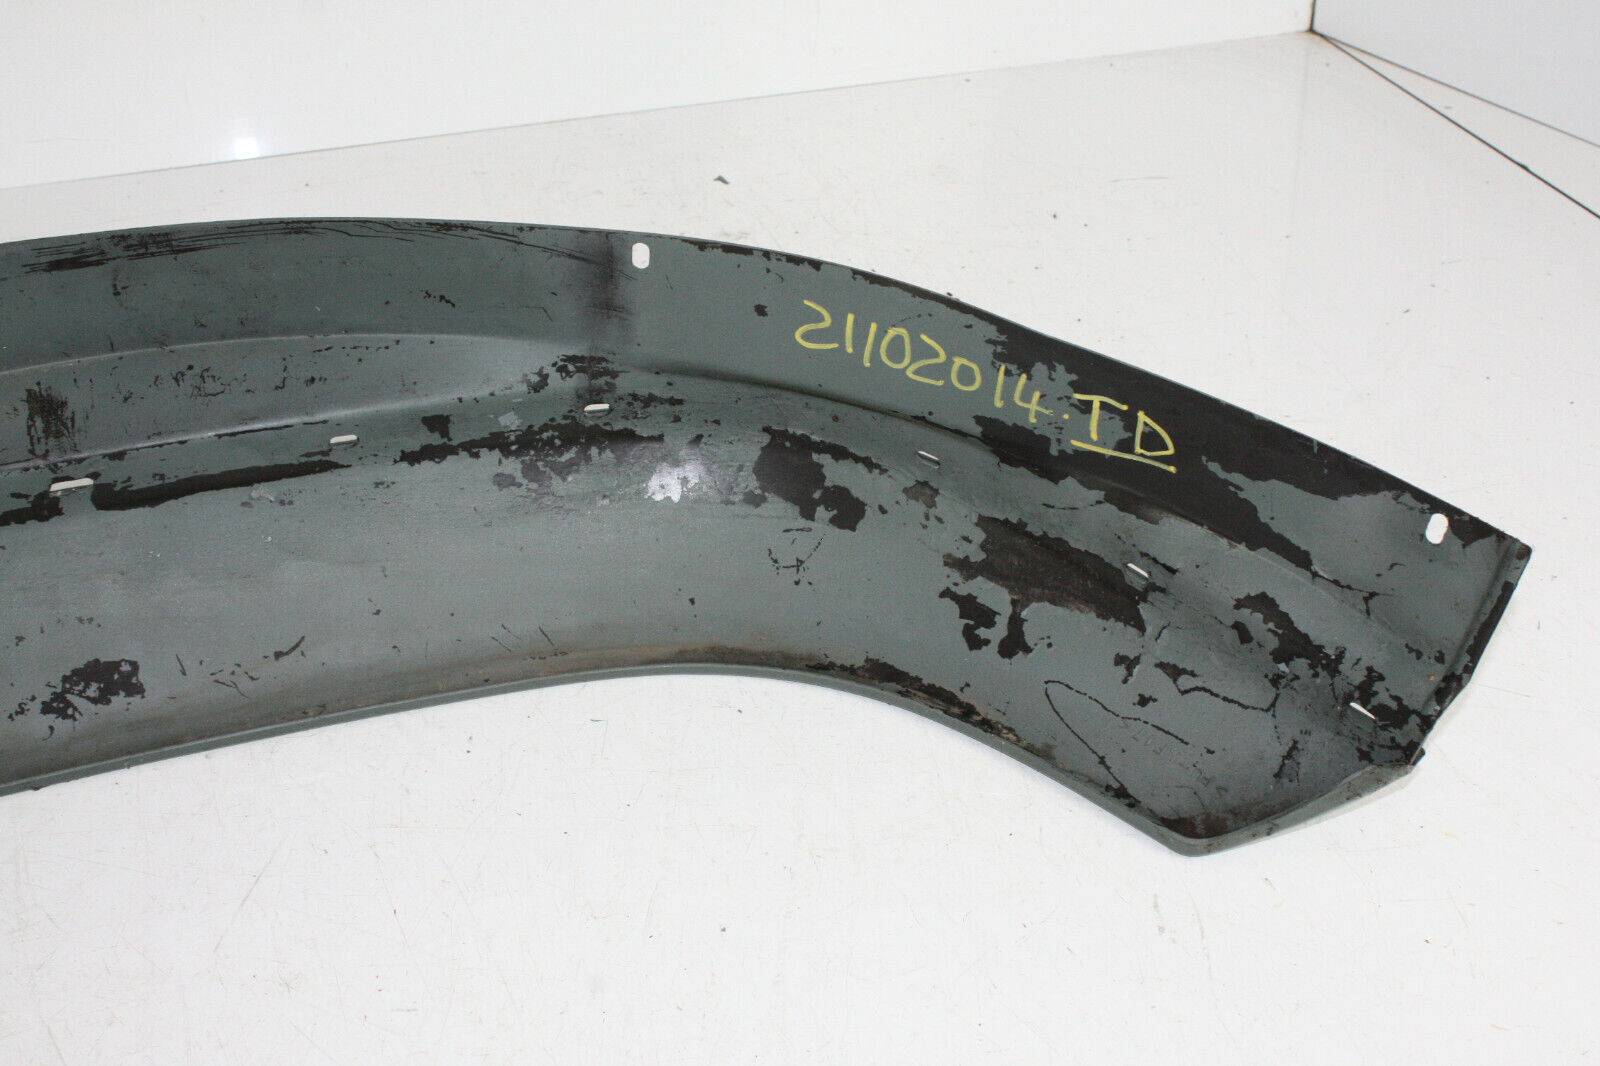 Land-Rover-Defender-Wheel-Arch-Flare-Spat-Front-Left-Painted-Type-Genuine-175367529954-8